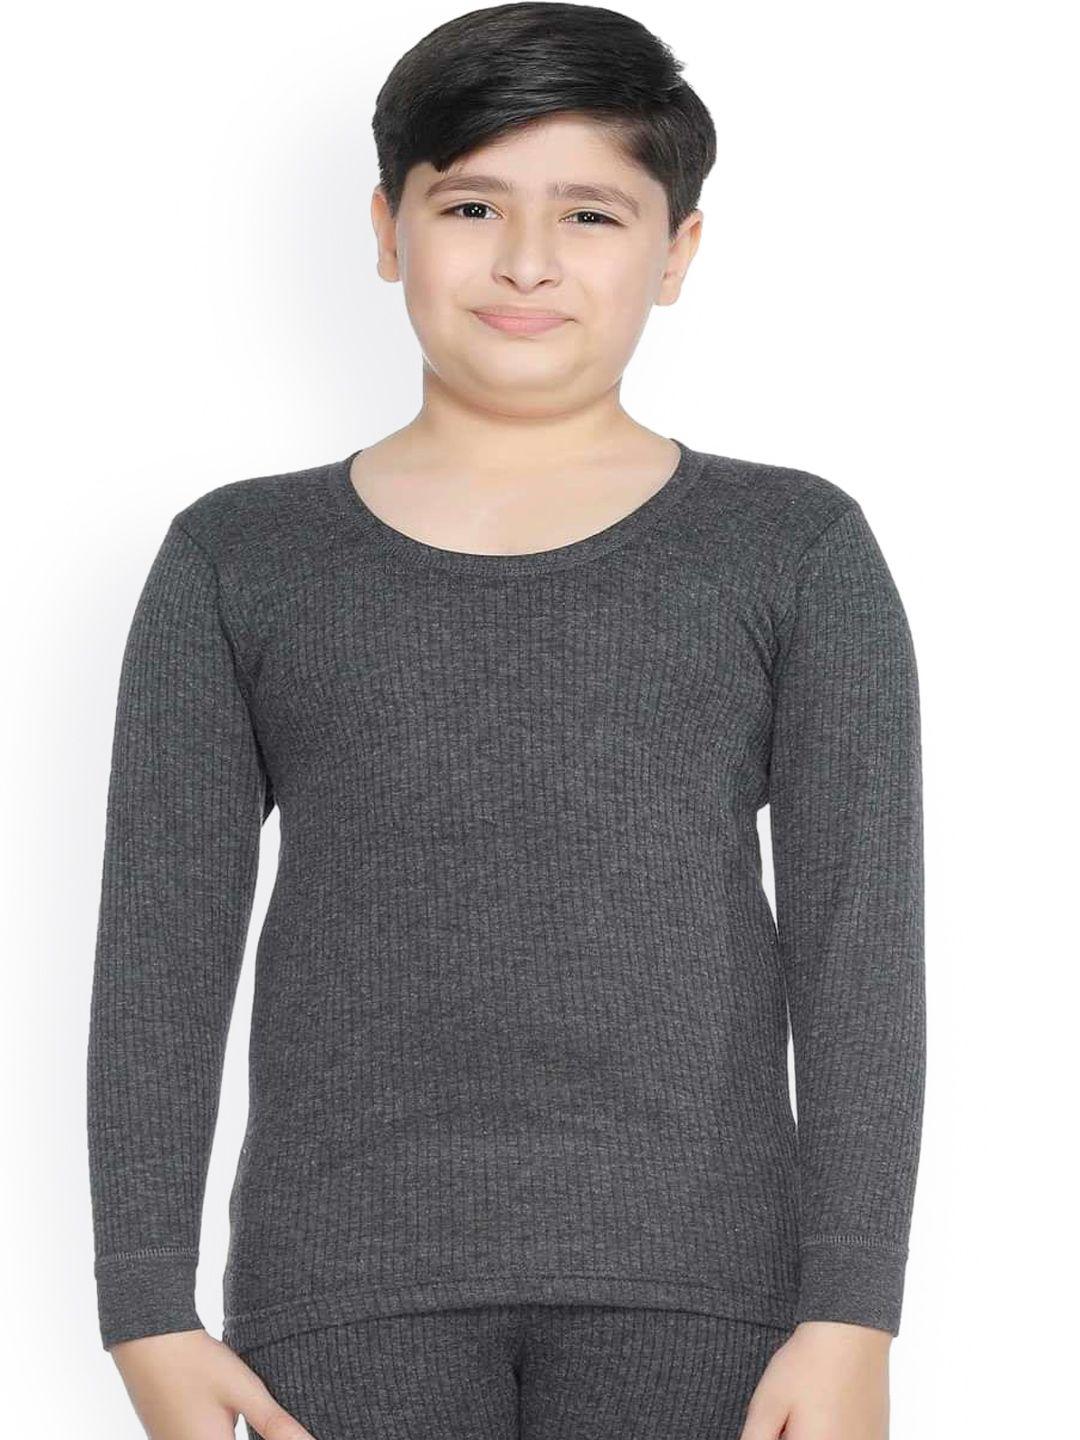 bodycare kids boys grey solid cotton thermal full sleeves tops